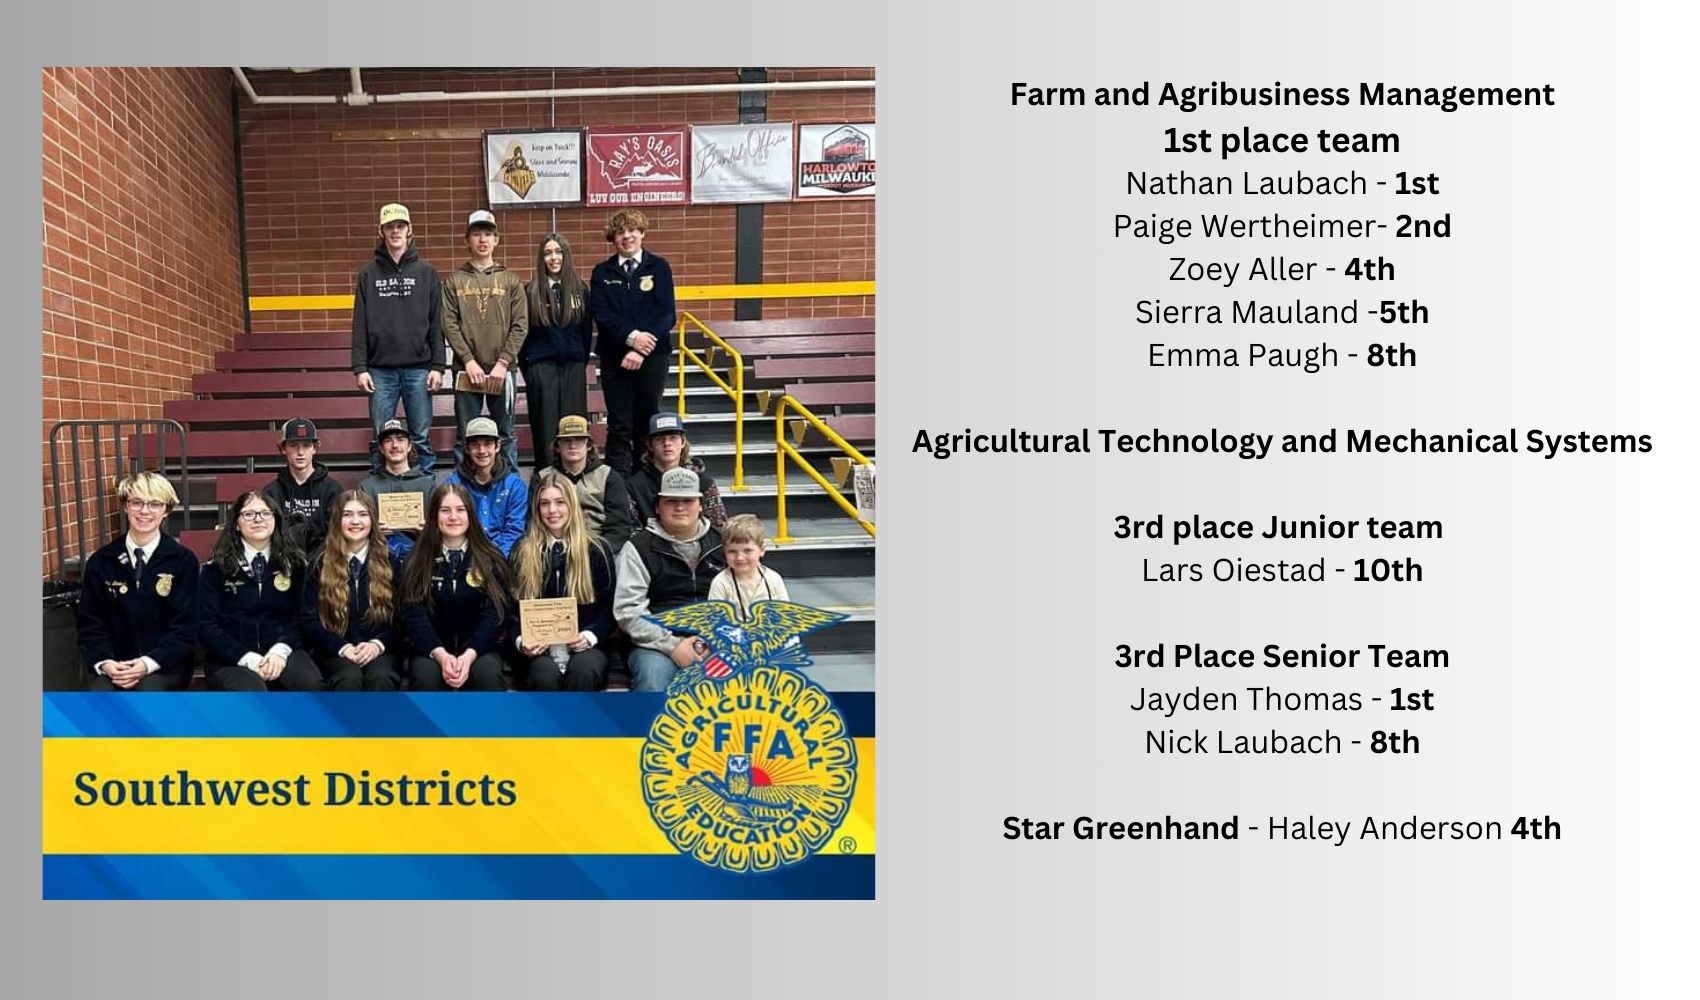 FFA Southwest Districts: Farm and Agribusiness Management 1st place team Nathan Laubach - 1st Paige Wertheimer- 2nd Zoey Aller - 4th Sierra Mauland -5th Emma Paugh - 8th  Agricultural Technology and Mechanical Systems  3rd place Junior team  Lars Oiestad - 10th  3rd Place Senior Team Jayden Thomas - 1st Nick Laubach - 8th  Star Greenhand - Haley Anderson 4th